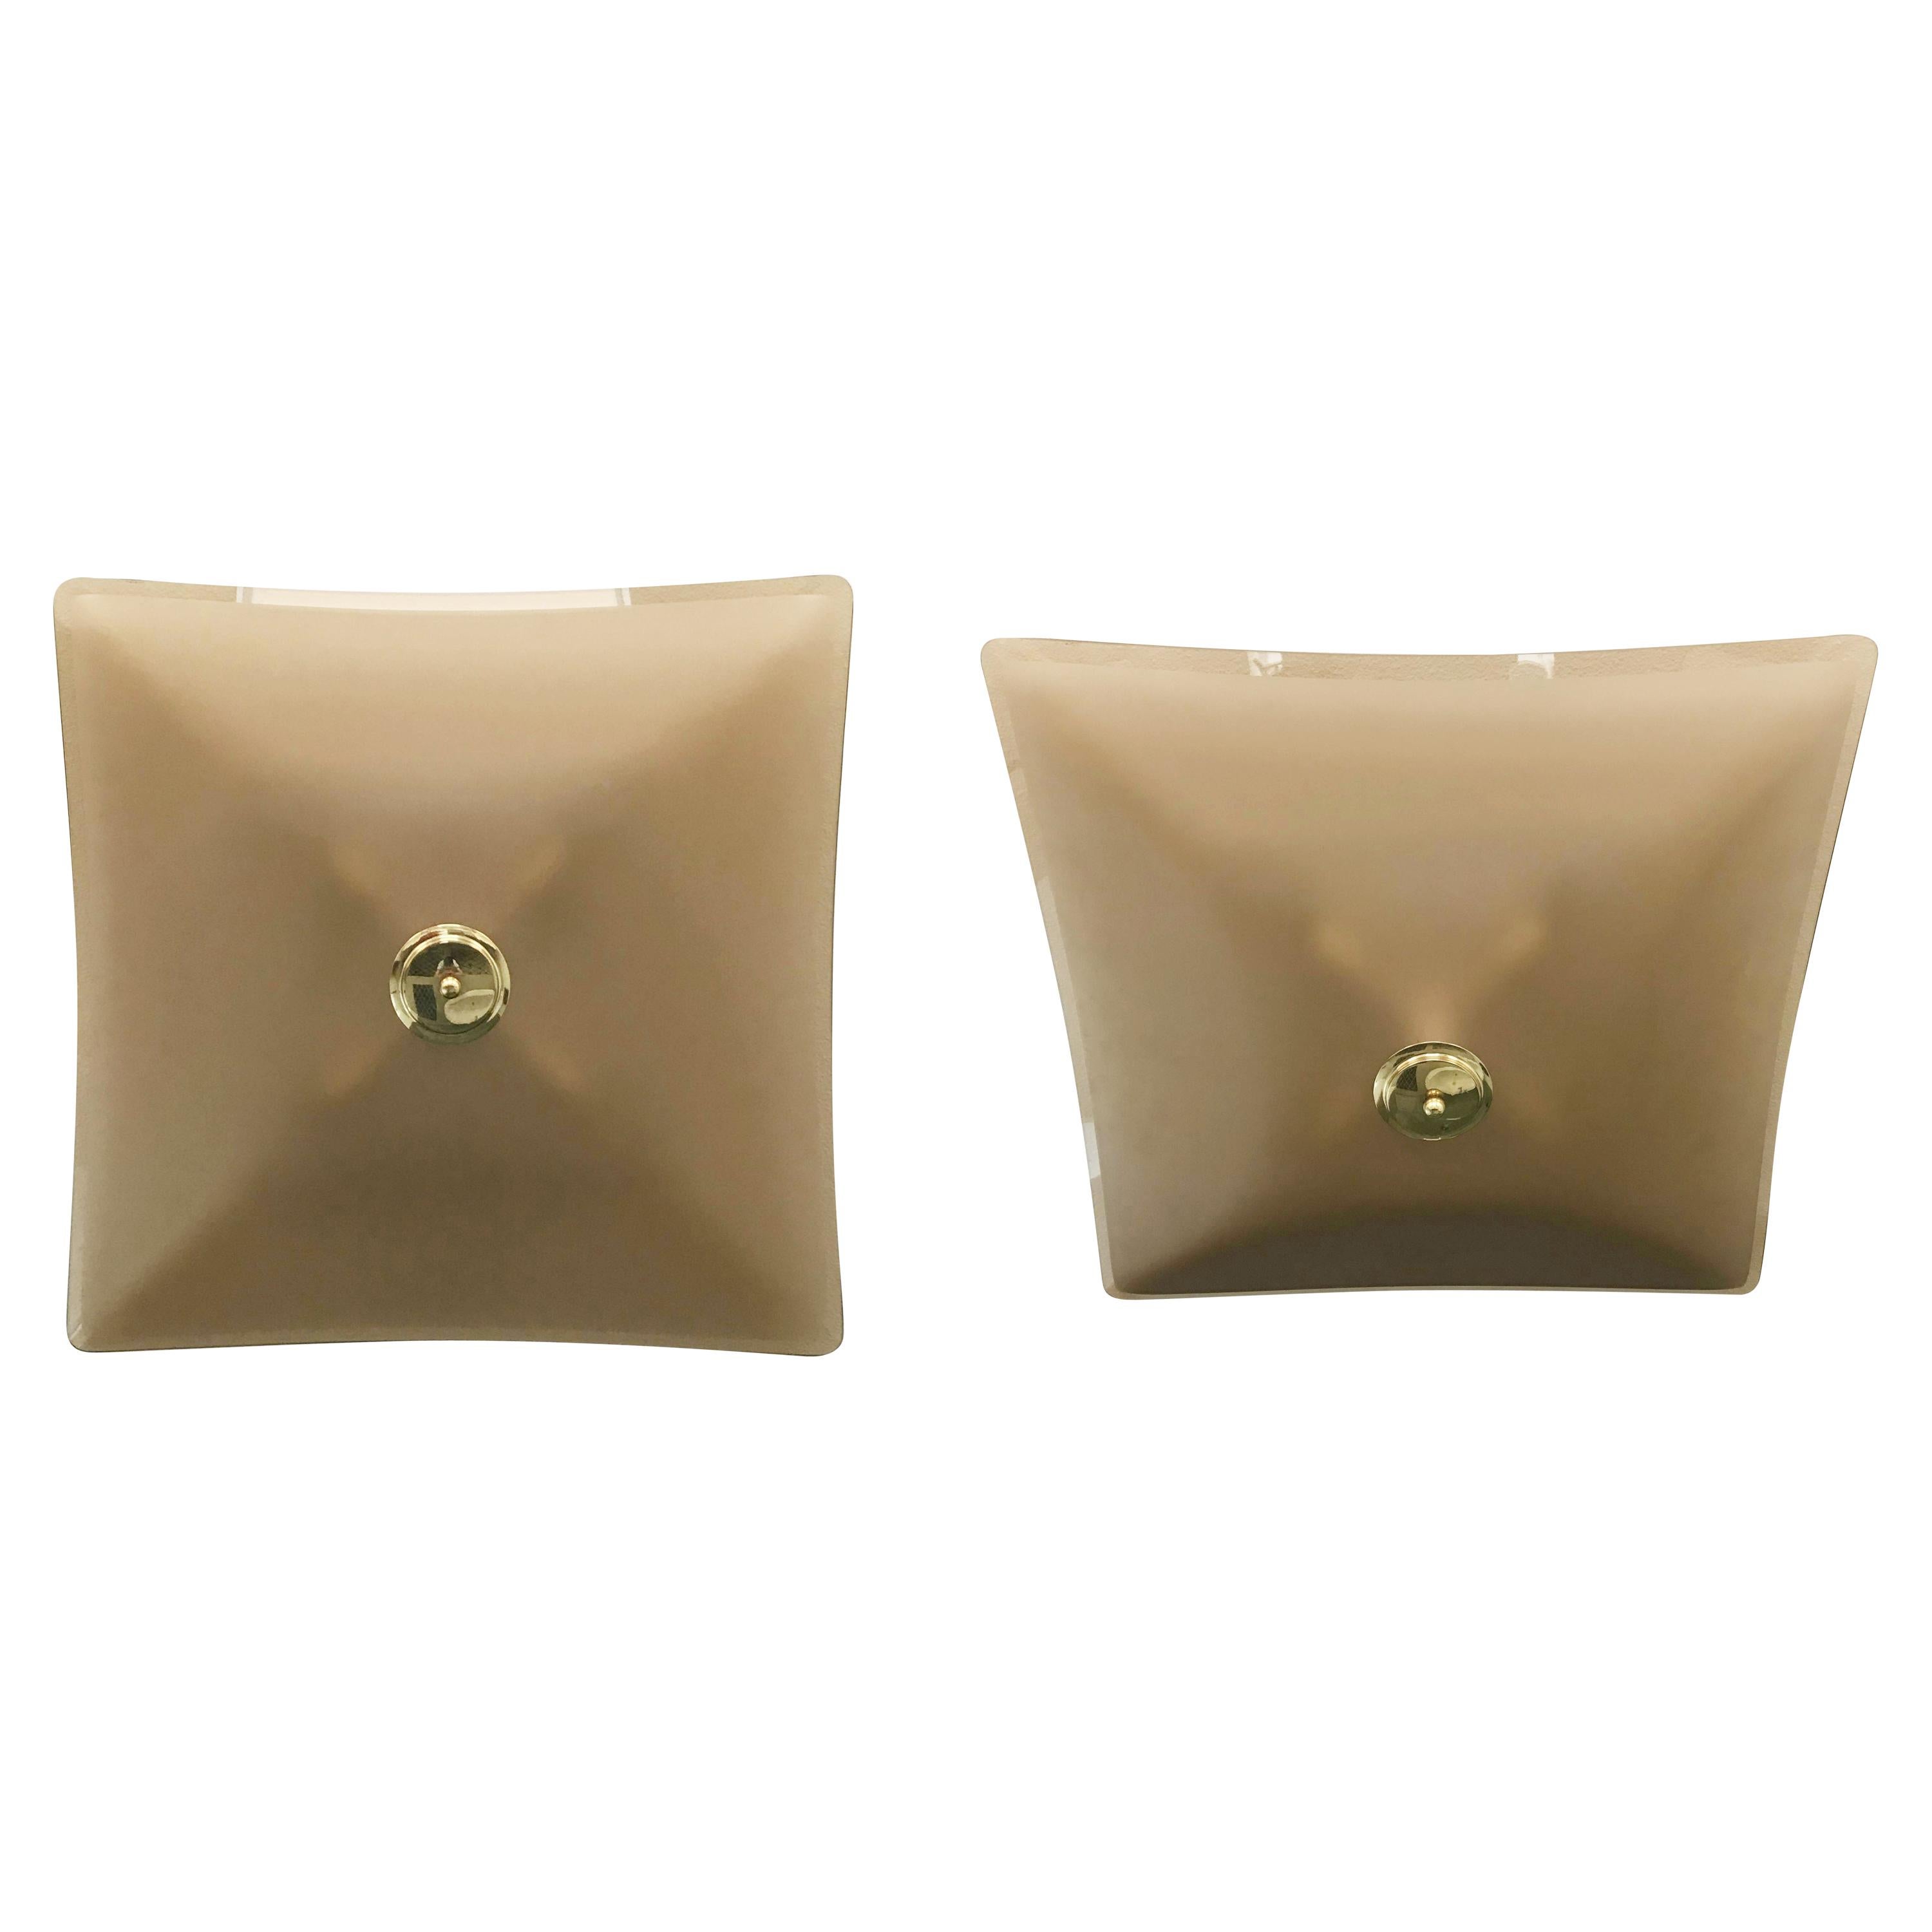 Elegant Italian flush mount or wall sconce, composed of single smoky colored glass diffusers with beveled edge and satin center, mounted with brass finials on painted white back plates / Made in Italy, circa 1960s.
4 lights / E12 or E14 type / max